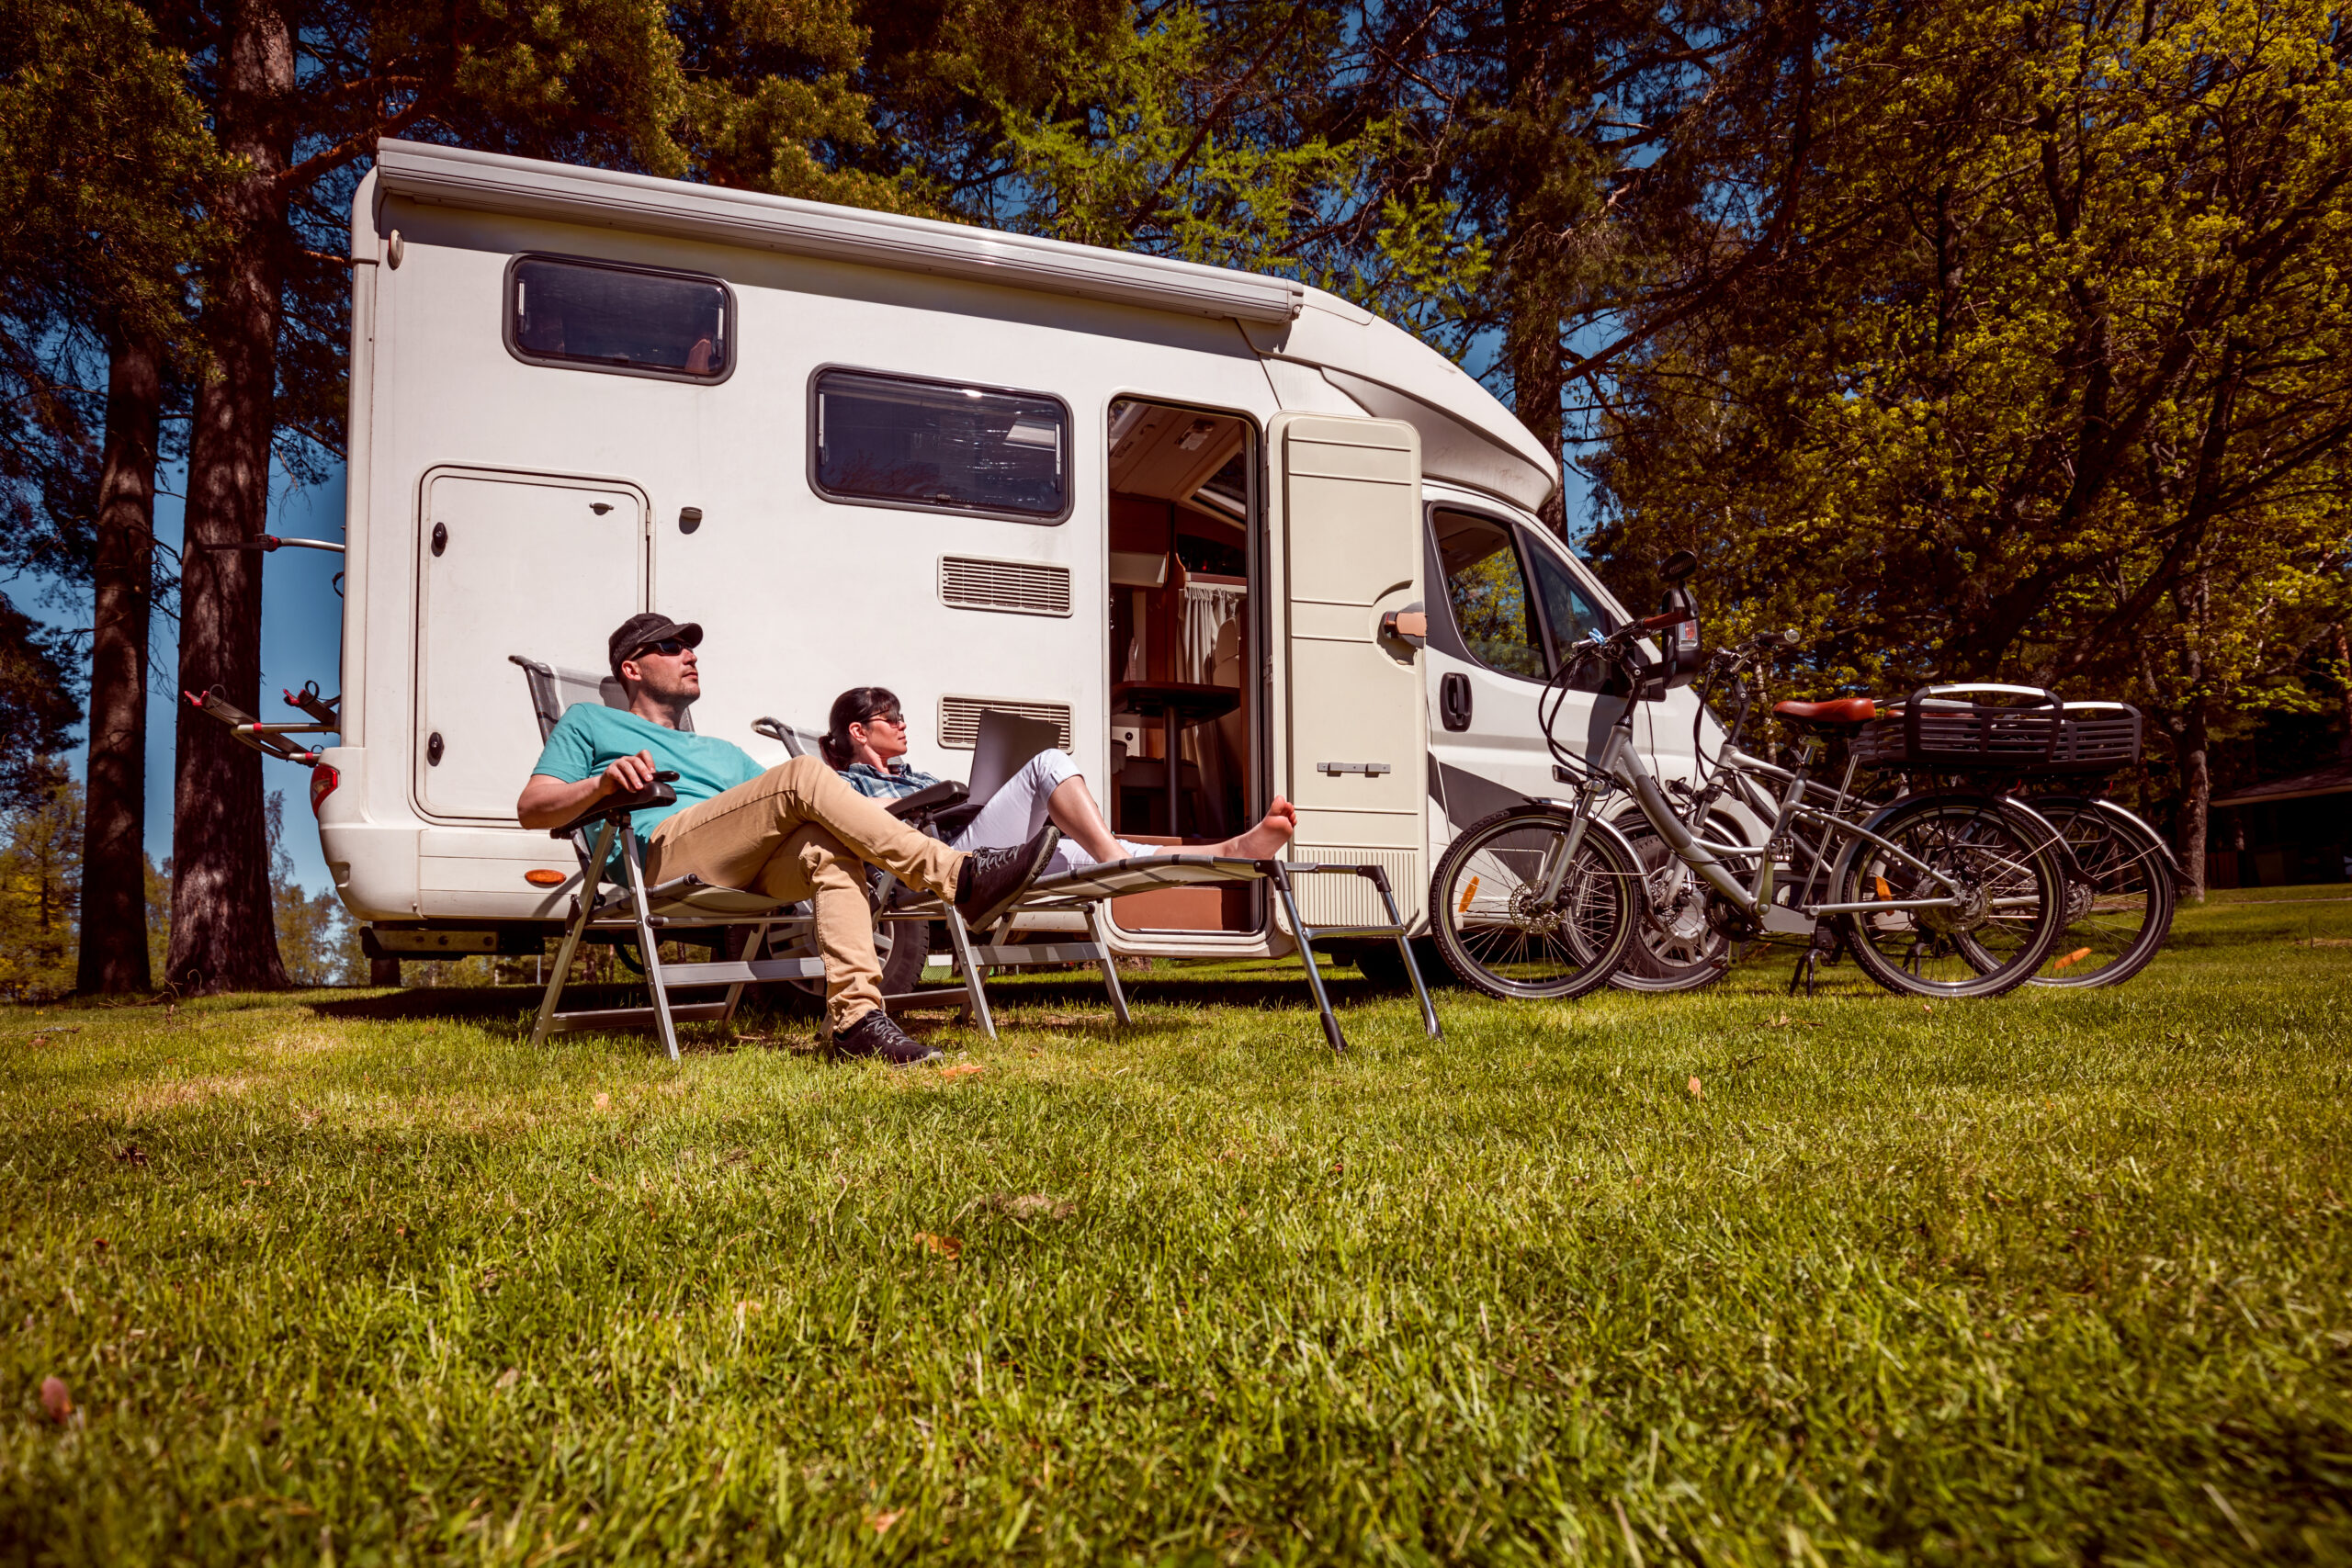 extended-stay rentals in RV park